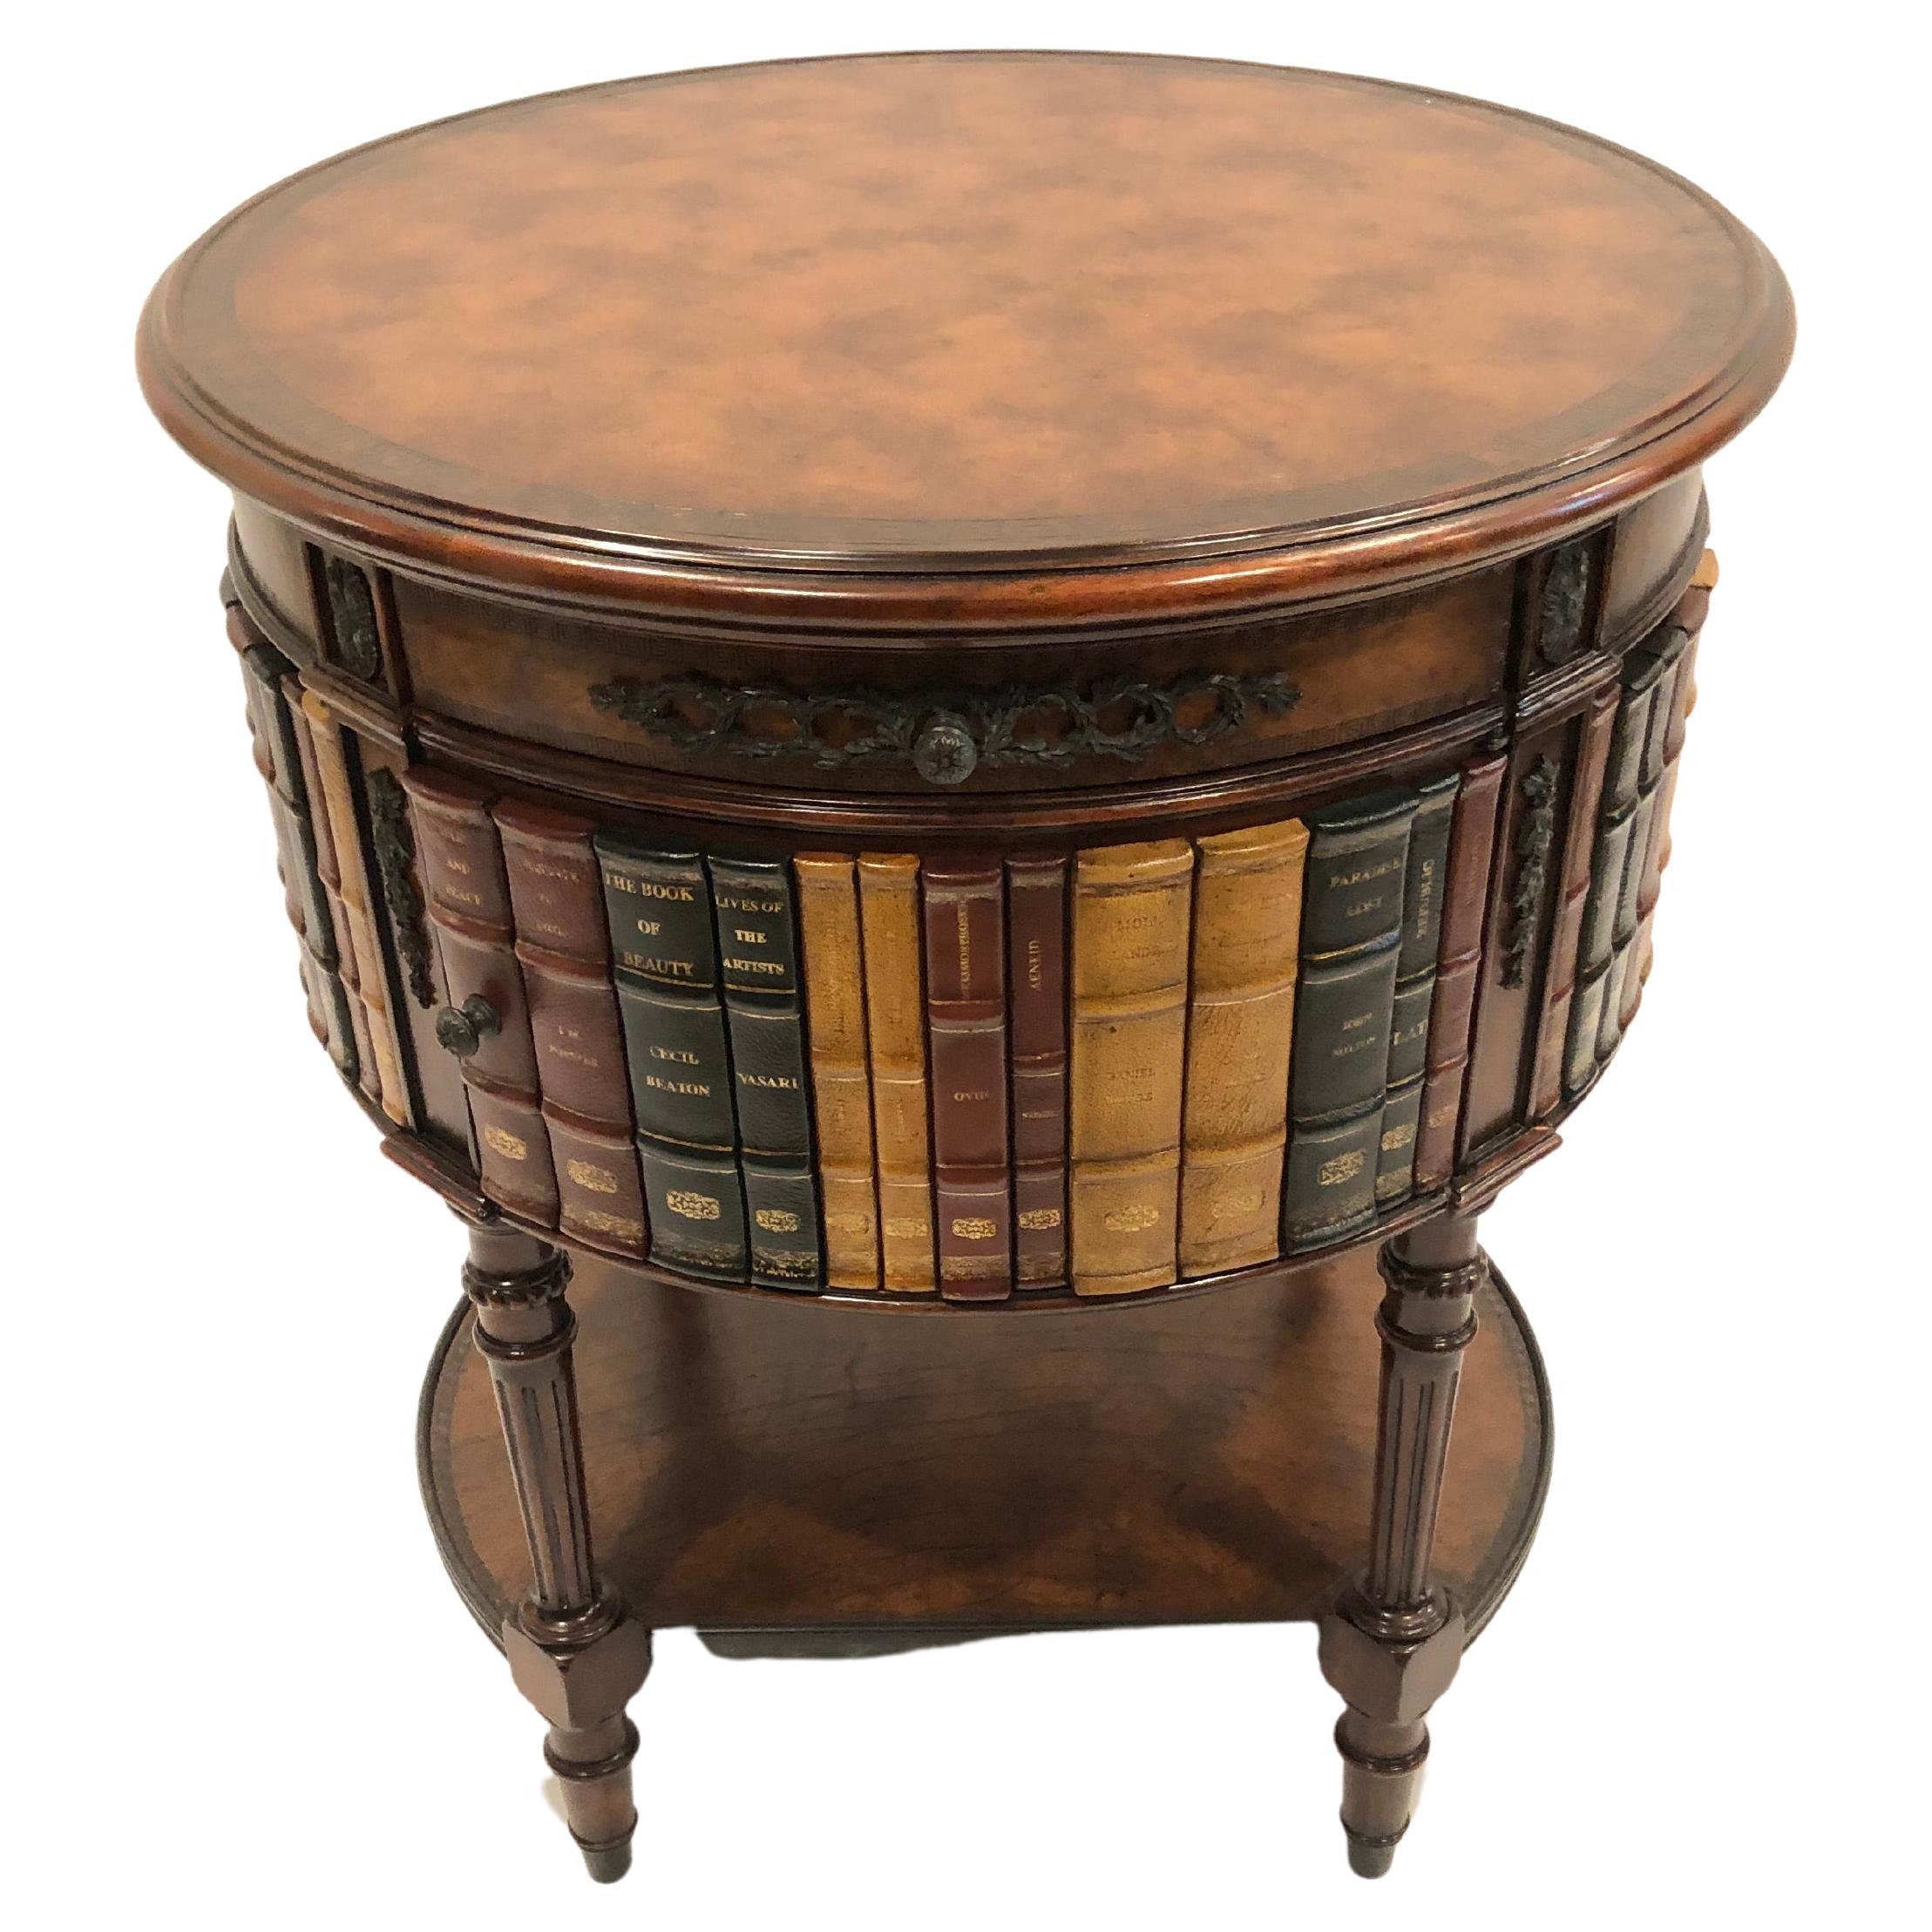 Handsome Theodore Alexander Round Leather & Burl Book Motif Side Table Cabinet